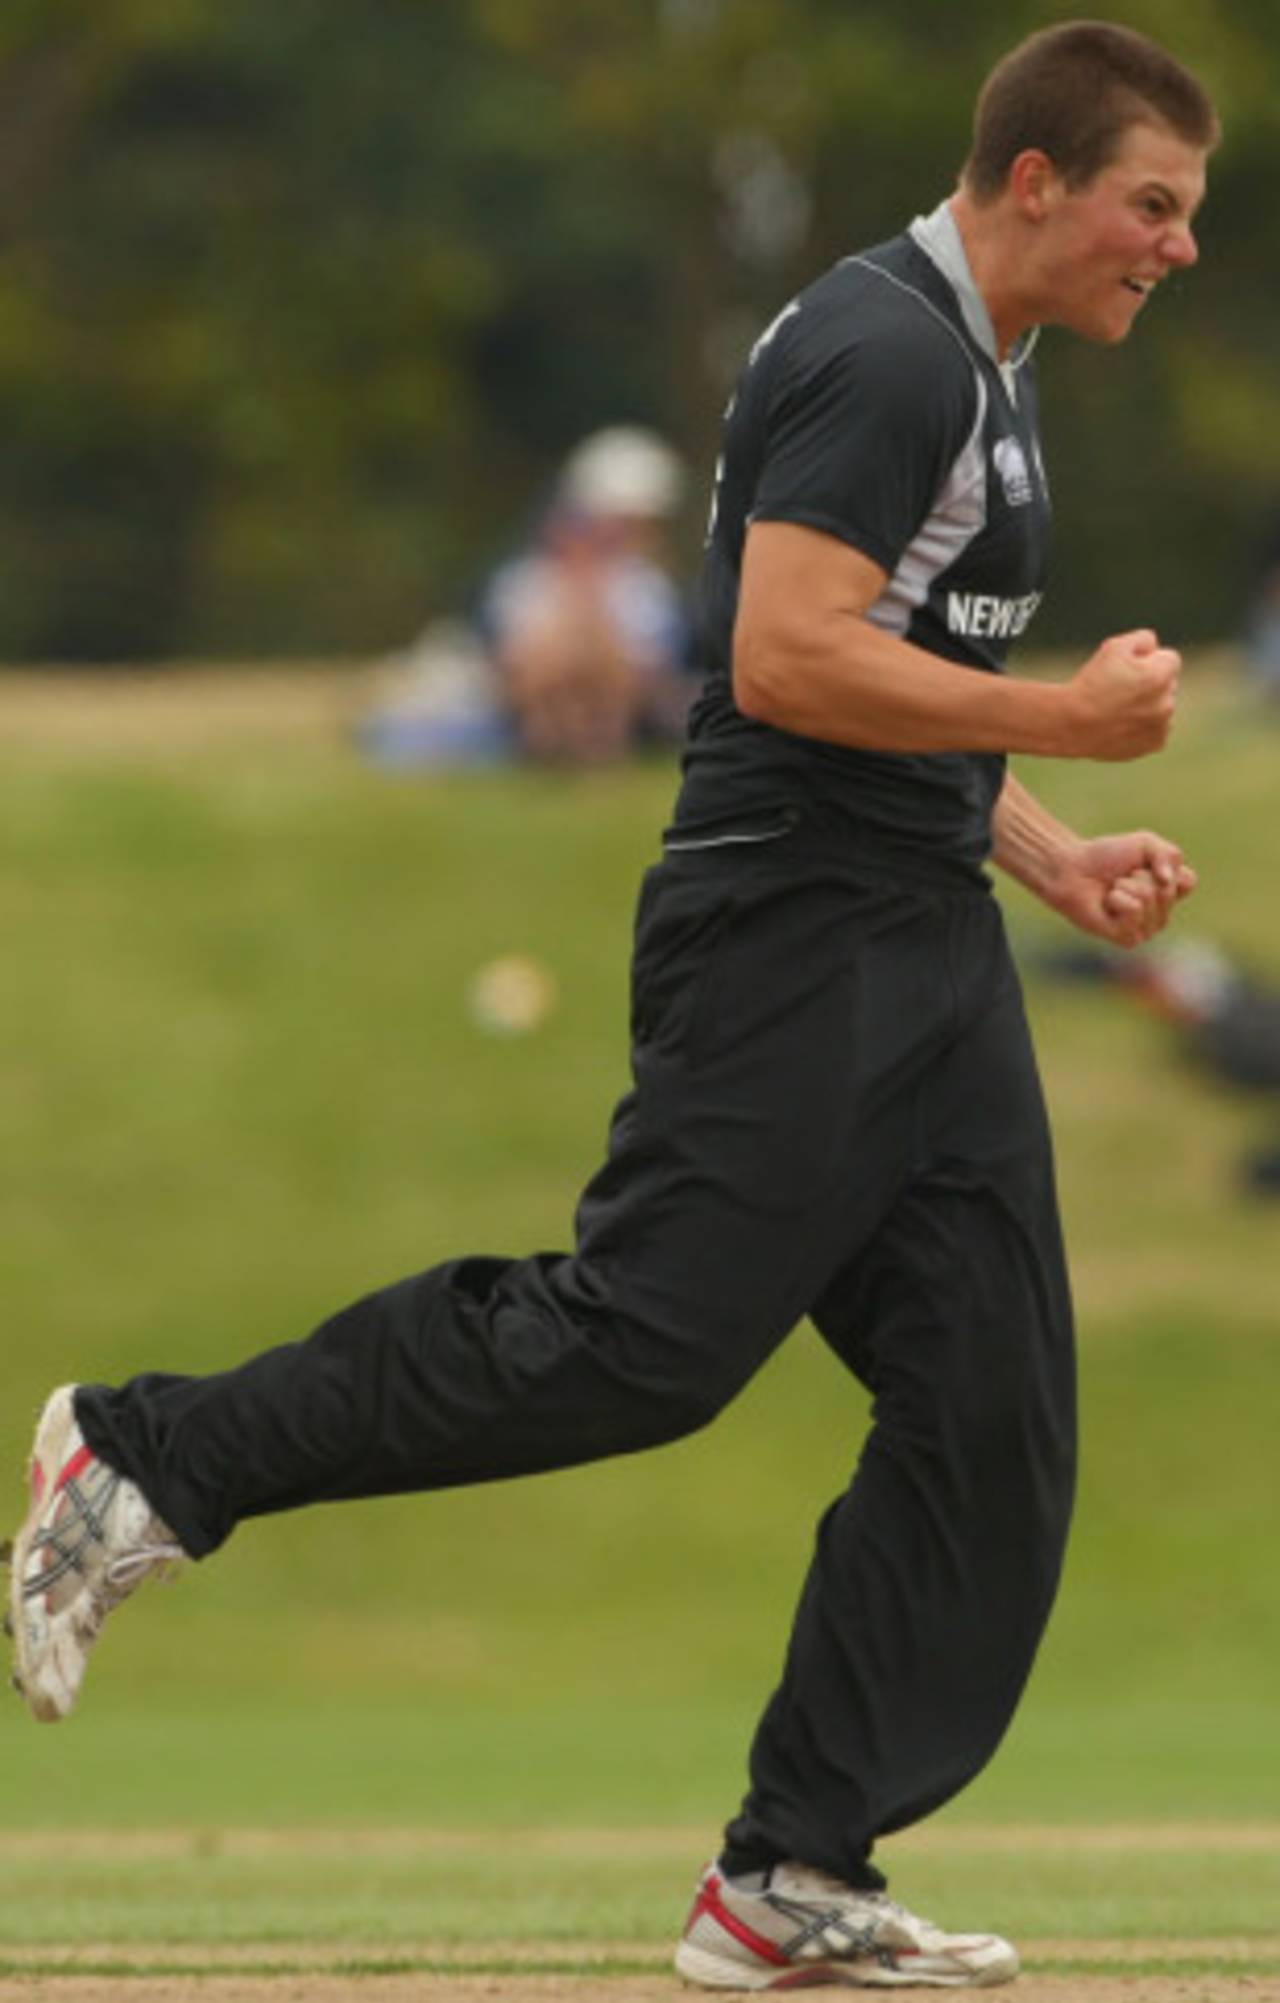 Tim Johnston exults during his spell, New Zealand Under-19s v Sri Lanka Under-19s, 23rd Match, Group C, ICC Under-19 World Cup, Christchurch, January 20, 2010